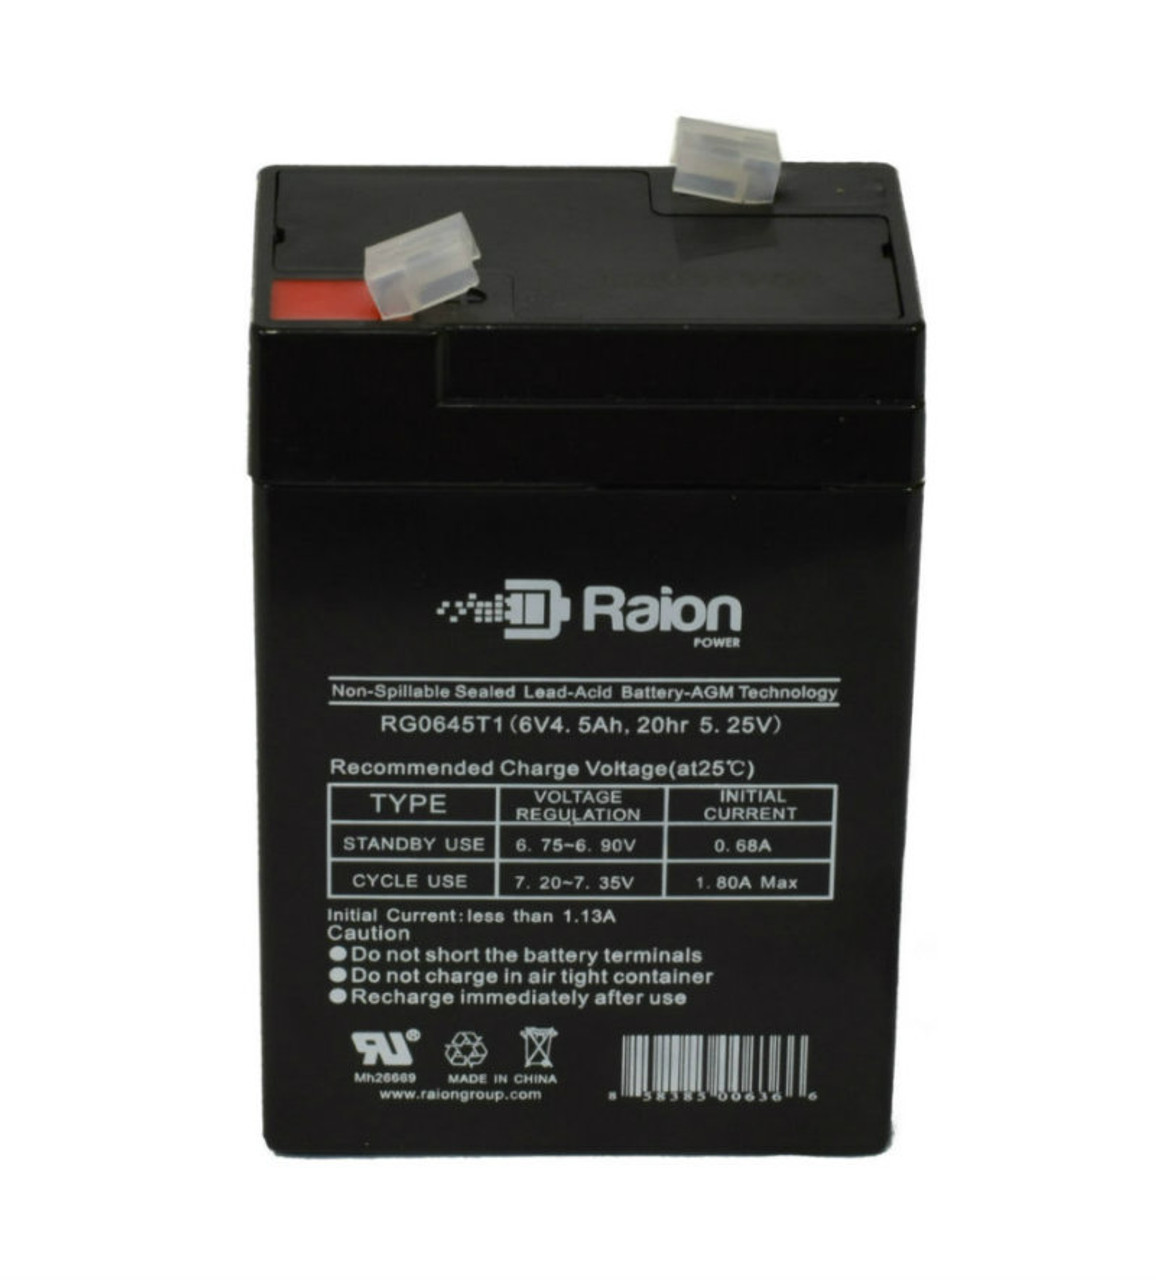 Raion Power RG0645T1 Replacement Battery Cartridge for Best Choice Products SKY4271 Mercedes-Benz G65 - Black